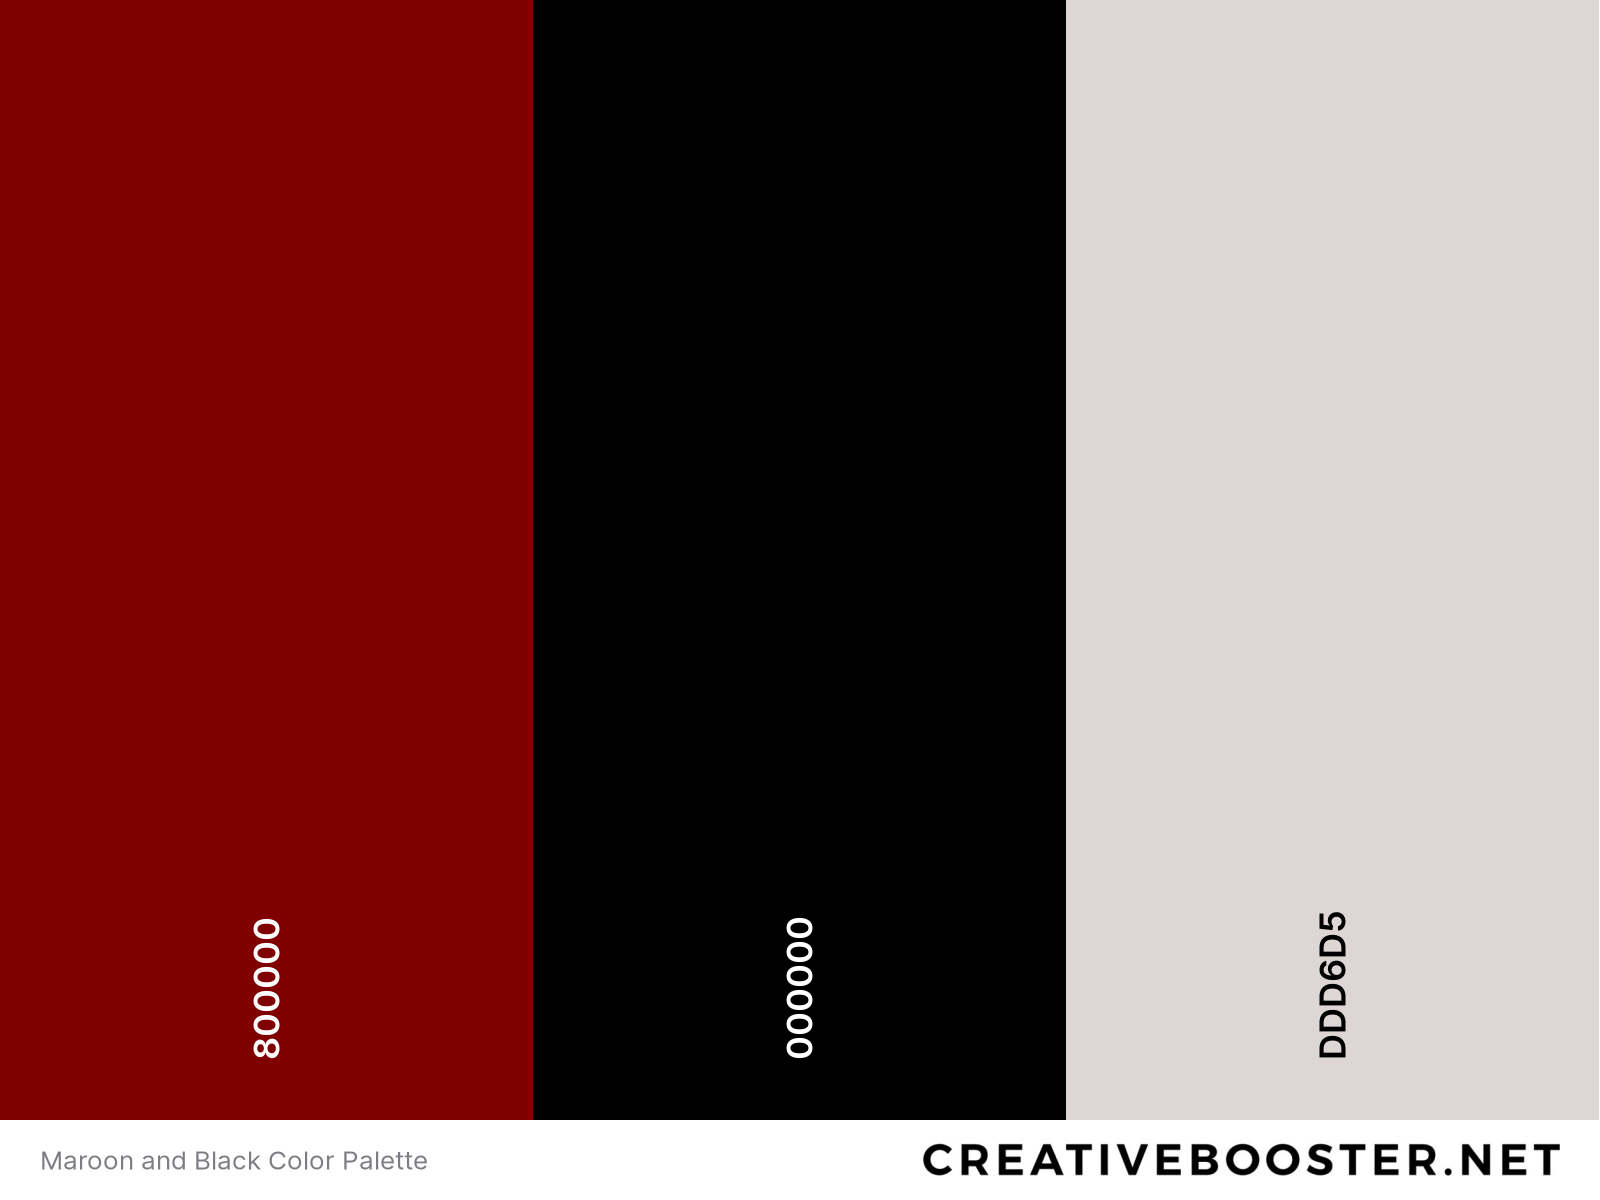 Maroon and Black Color Palette